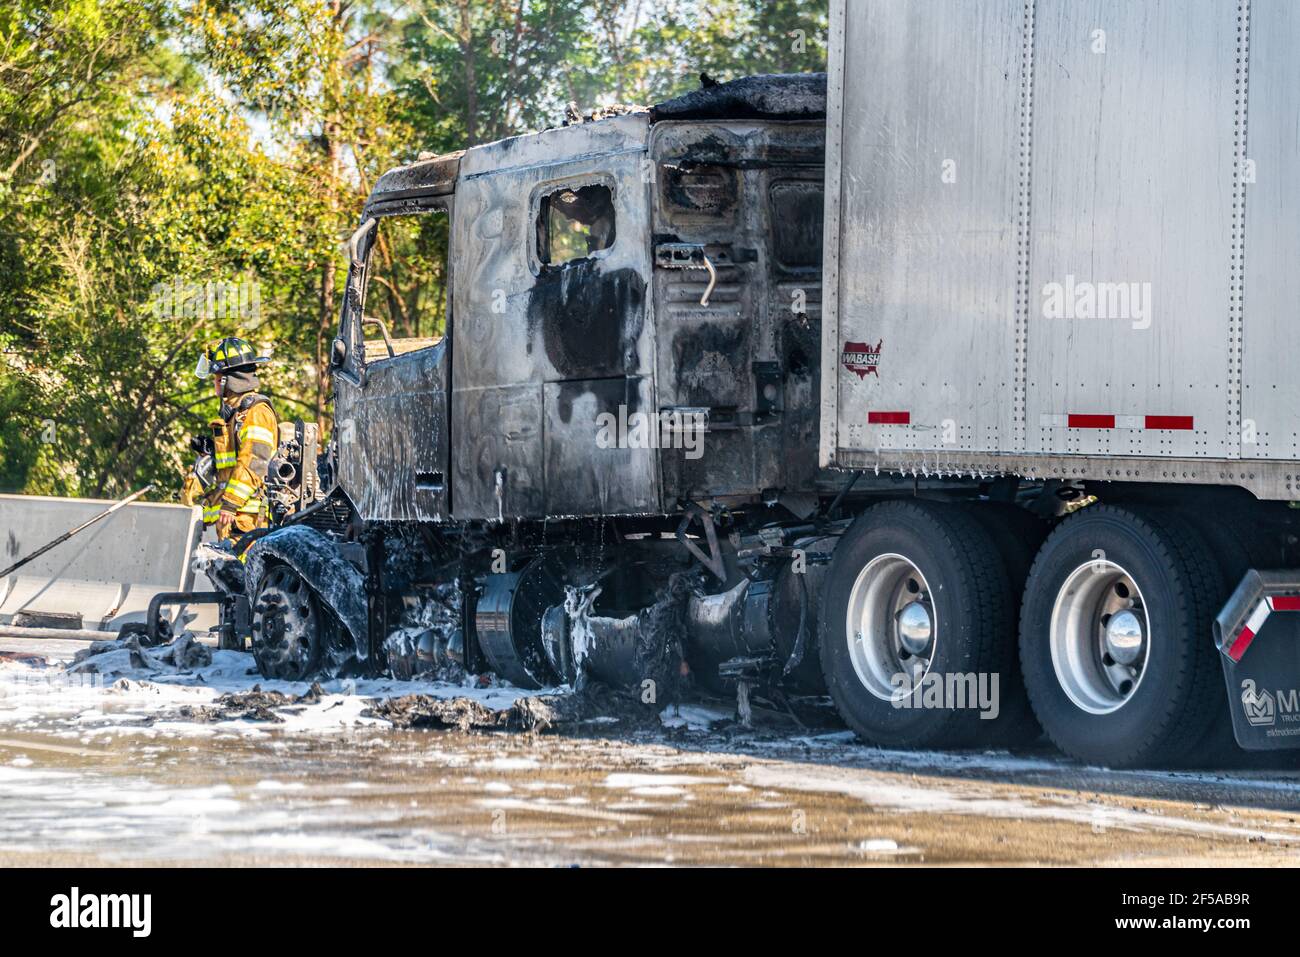 Firefighter at the scene of a semi truck fire on I-95 in downtown Jacksonville, Florida. (USA) Stock Photo